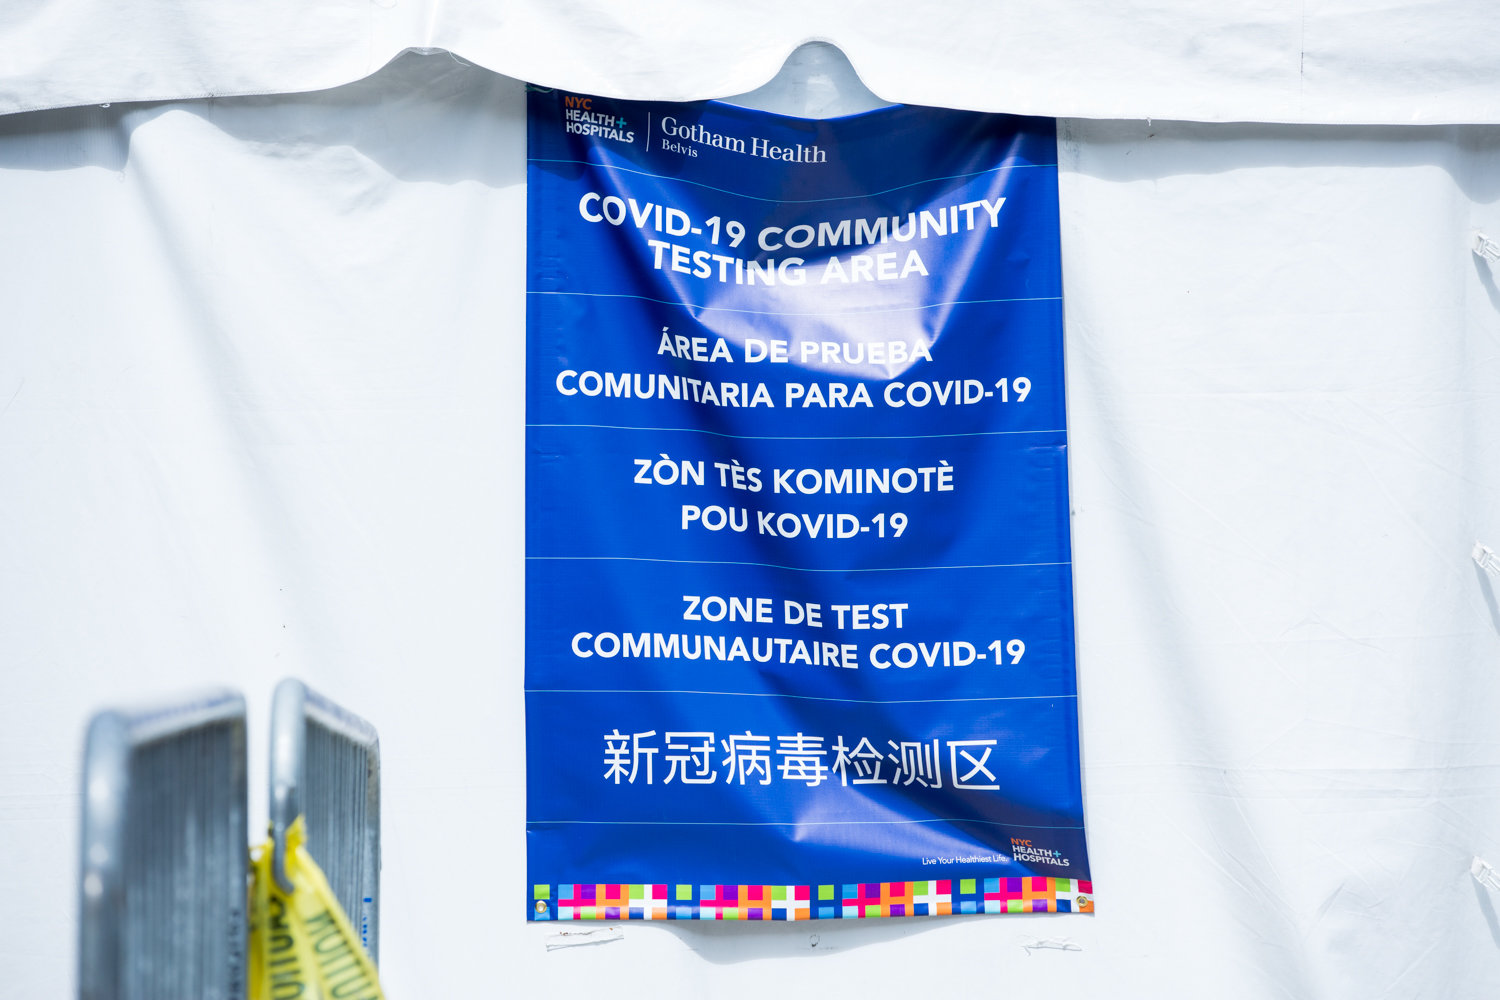 A sign on a tent informs people that NYC Health + Hospitals/Gotham Health, Belvis, is a diagnostic testing area for the coronavirus that causes COVID-19 — one of six testing centers in the borough.